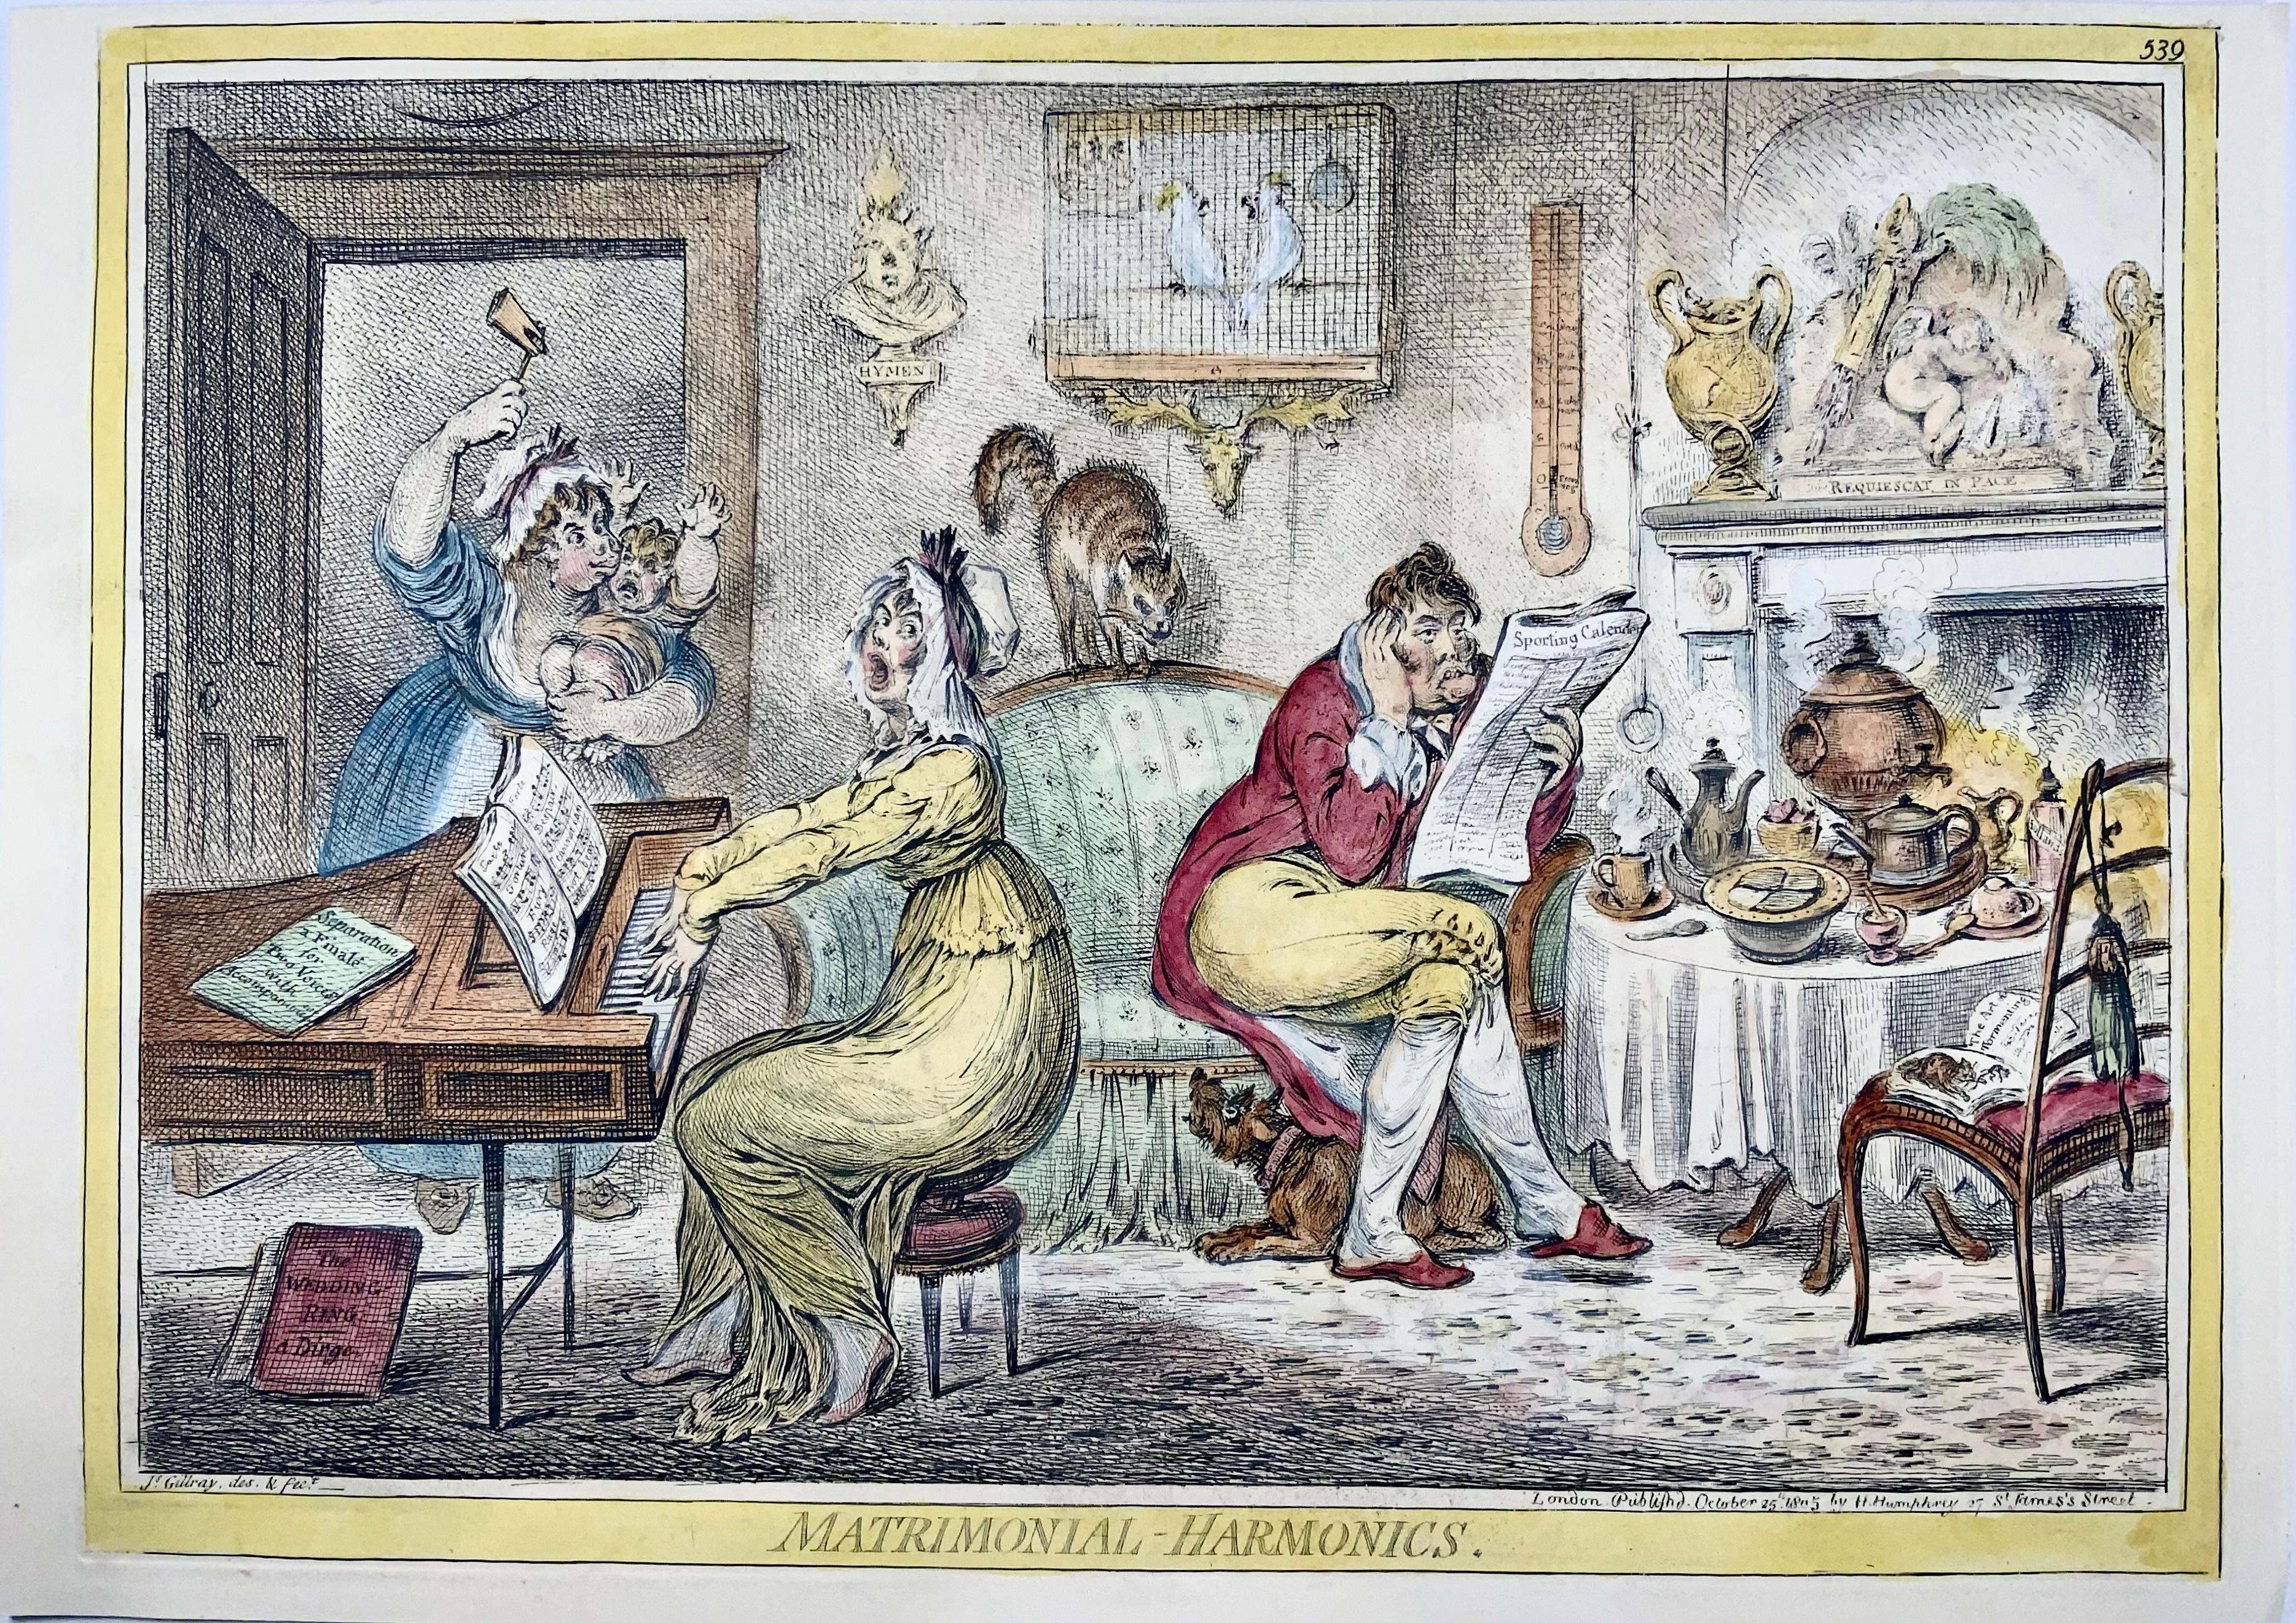 'Matrimonial Harmonics'

Published by: Hannah Humphrey 1805, Bohn Edition (1847). 

27.3 x 38 cm

Original hand coloured engraving. Caricature map of Britain in the guise of an old woman seated on a sea creature, from Bohn's with image on recto,